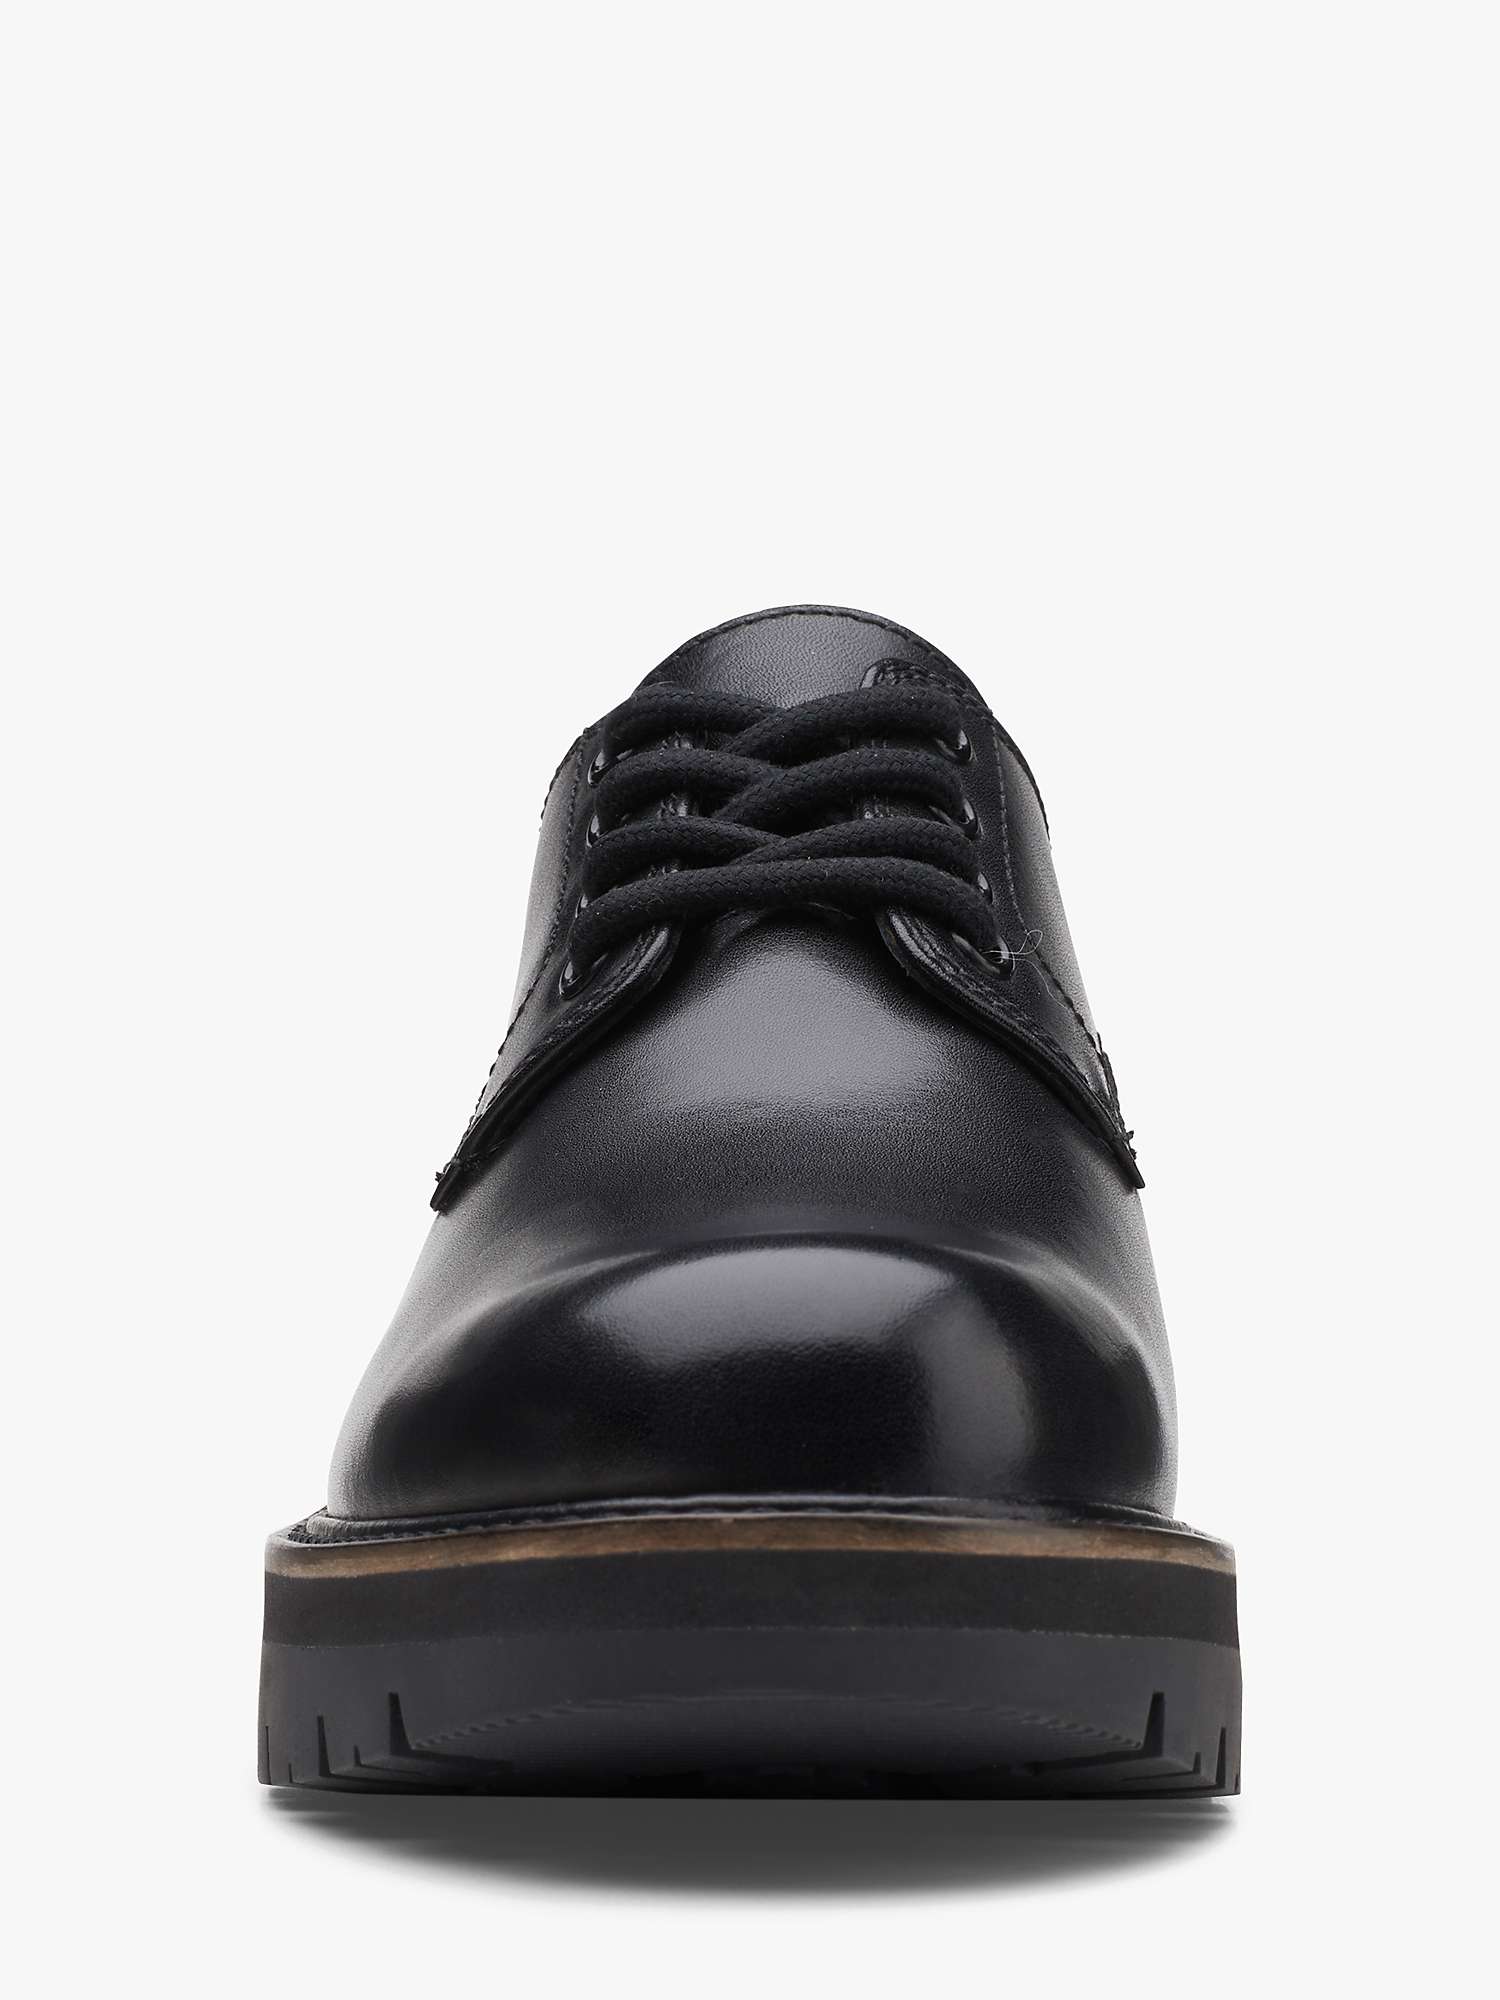 Clarks Orianna Leather Chunky Derby Shoes, Black at John Lewis & Partners